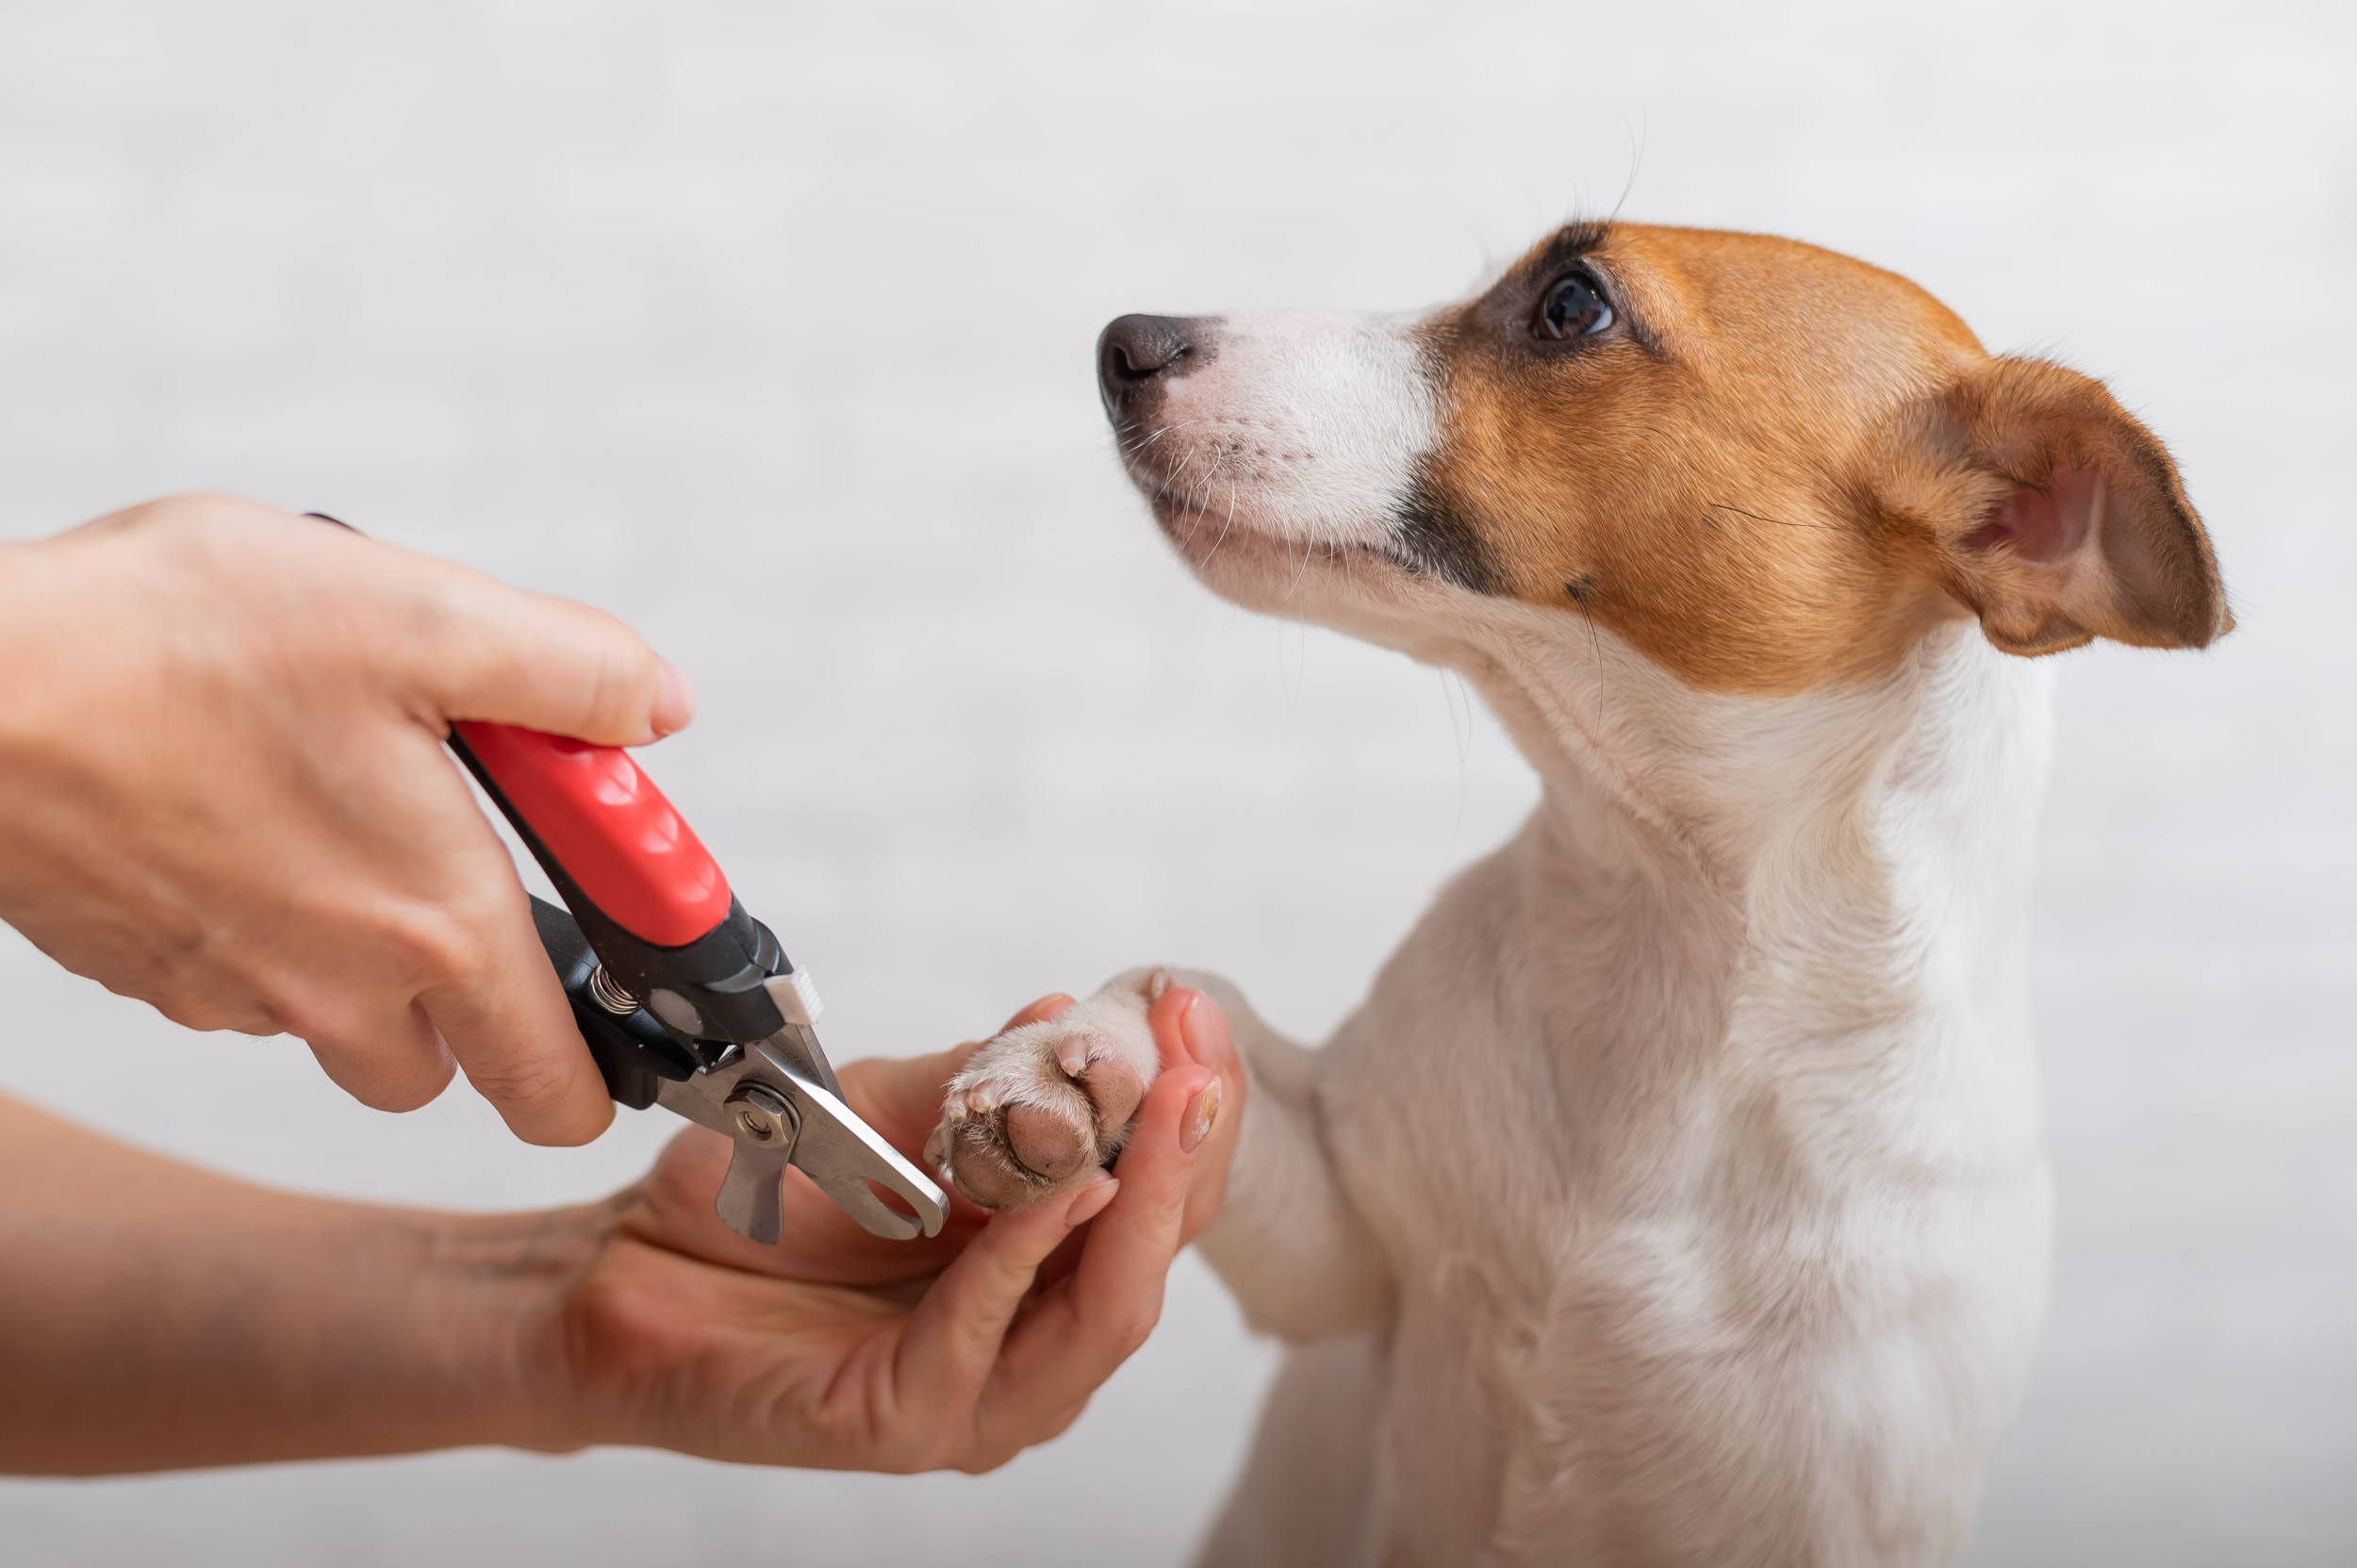 How Do I Protect My Car From Dog Scratches? – SLIPLO